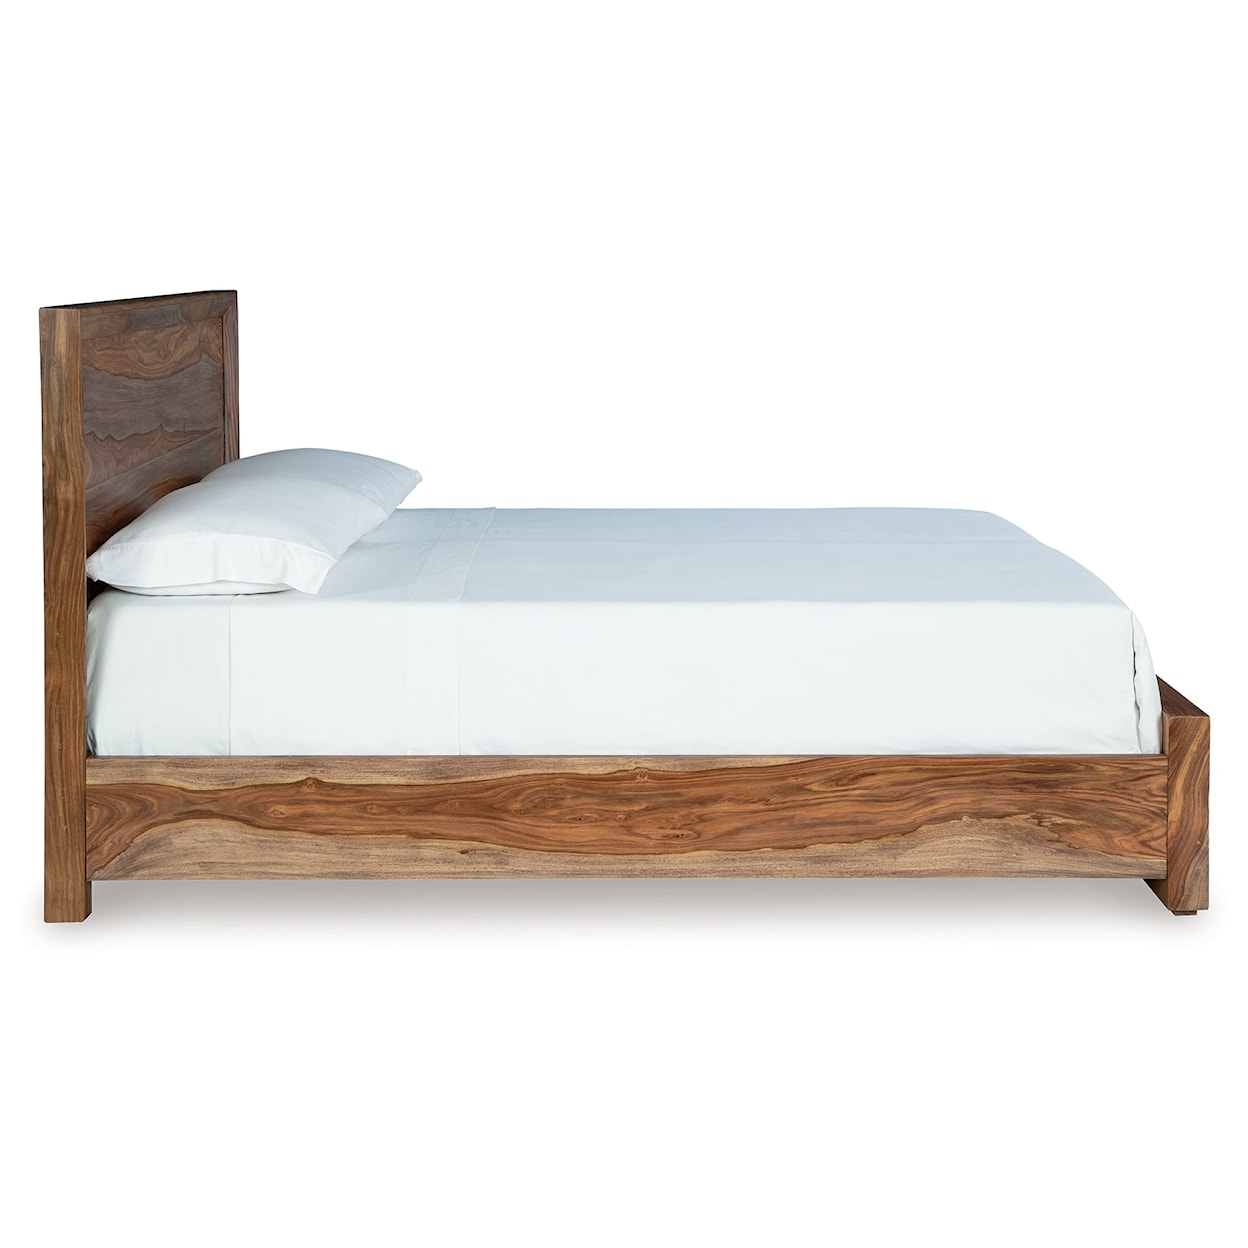 Signature Design by Ashley Dressonni Queen Panel Bed